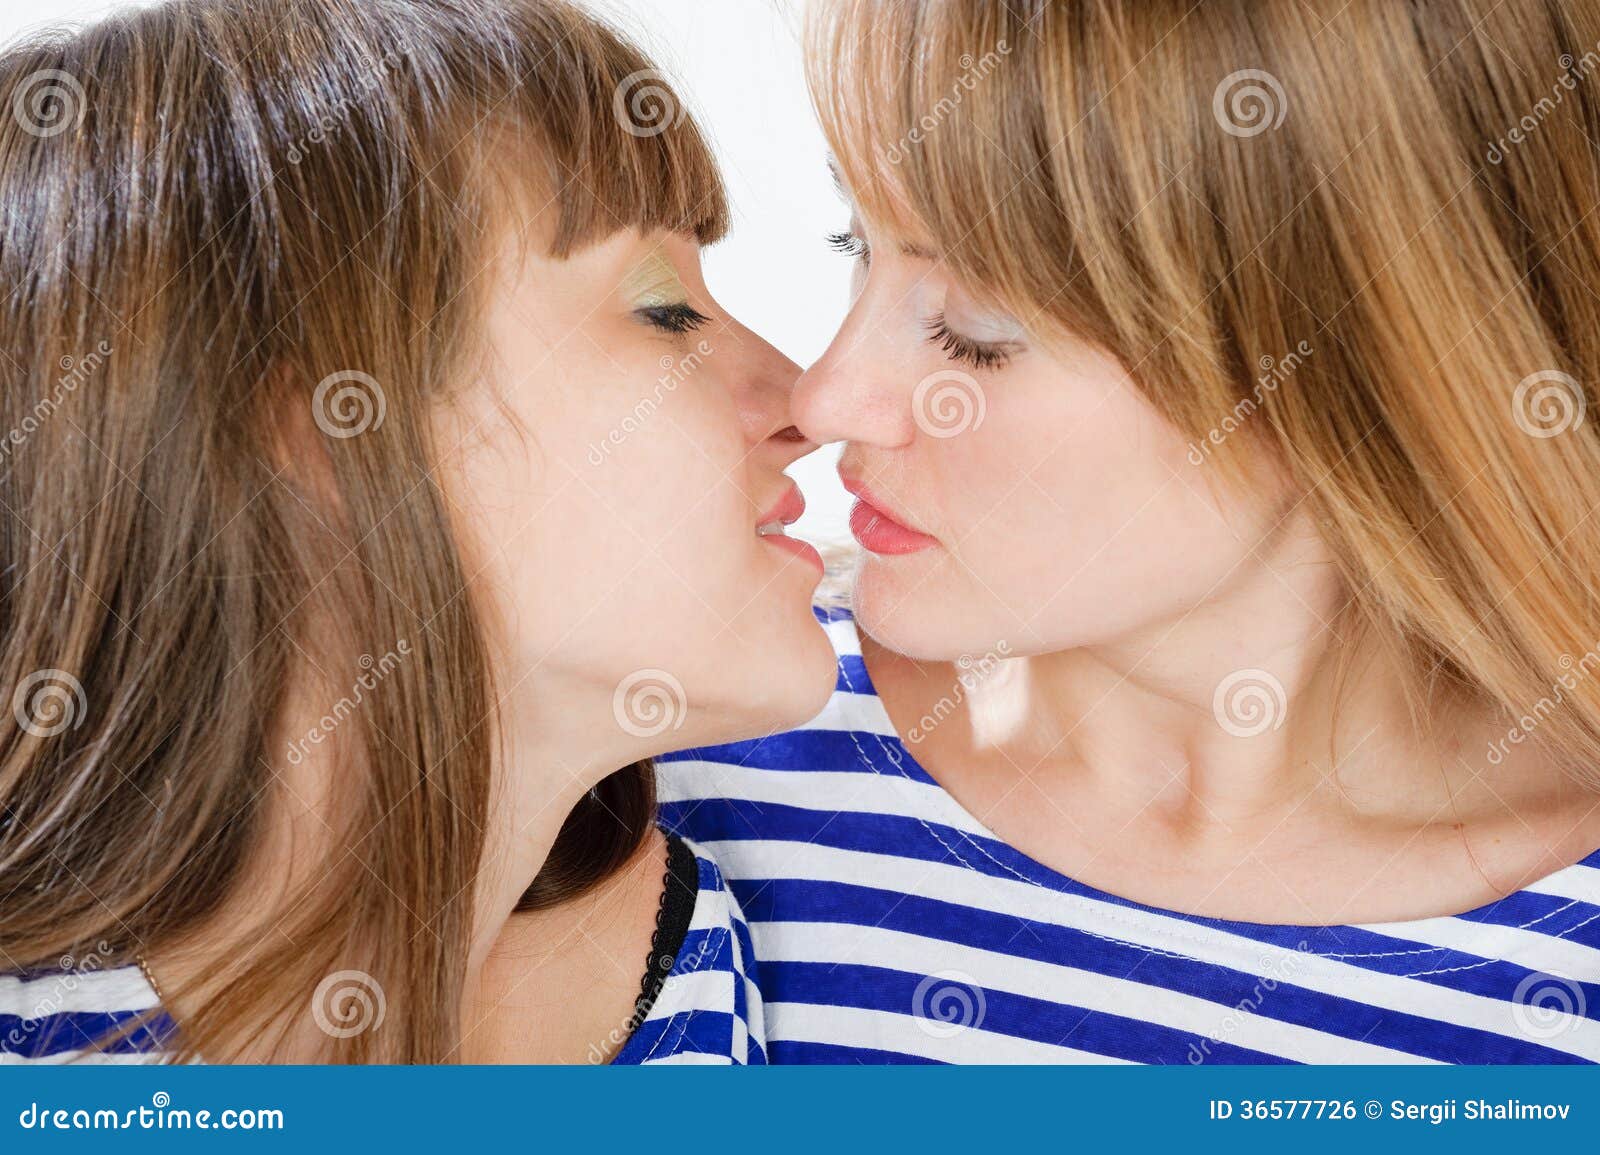 Two Girls Kissing Naked